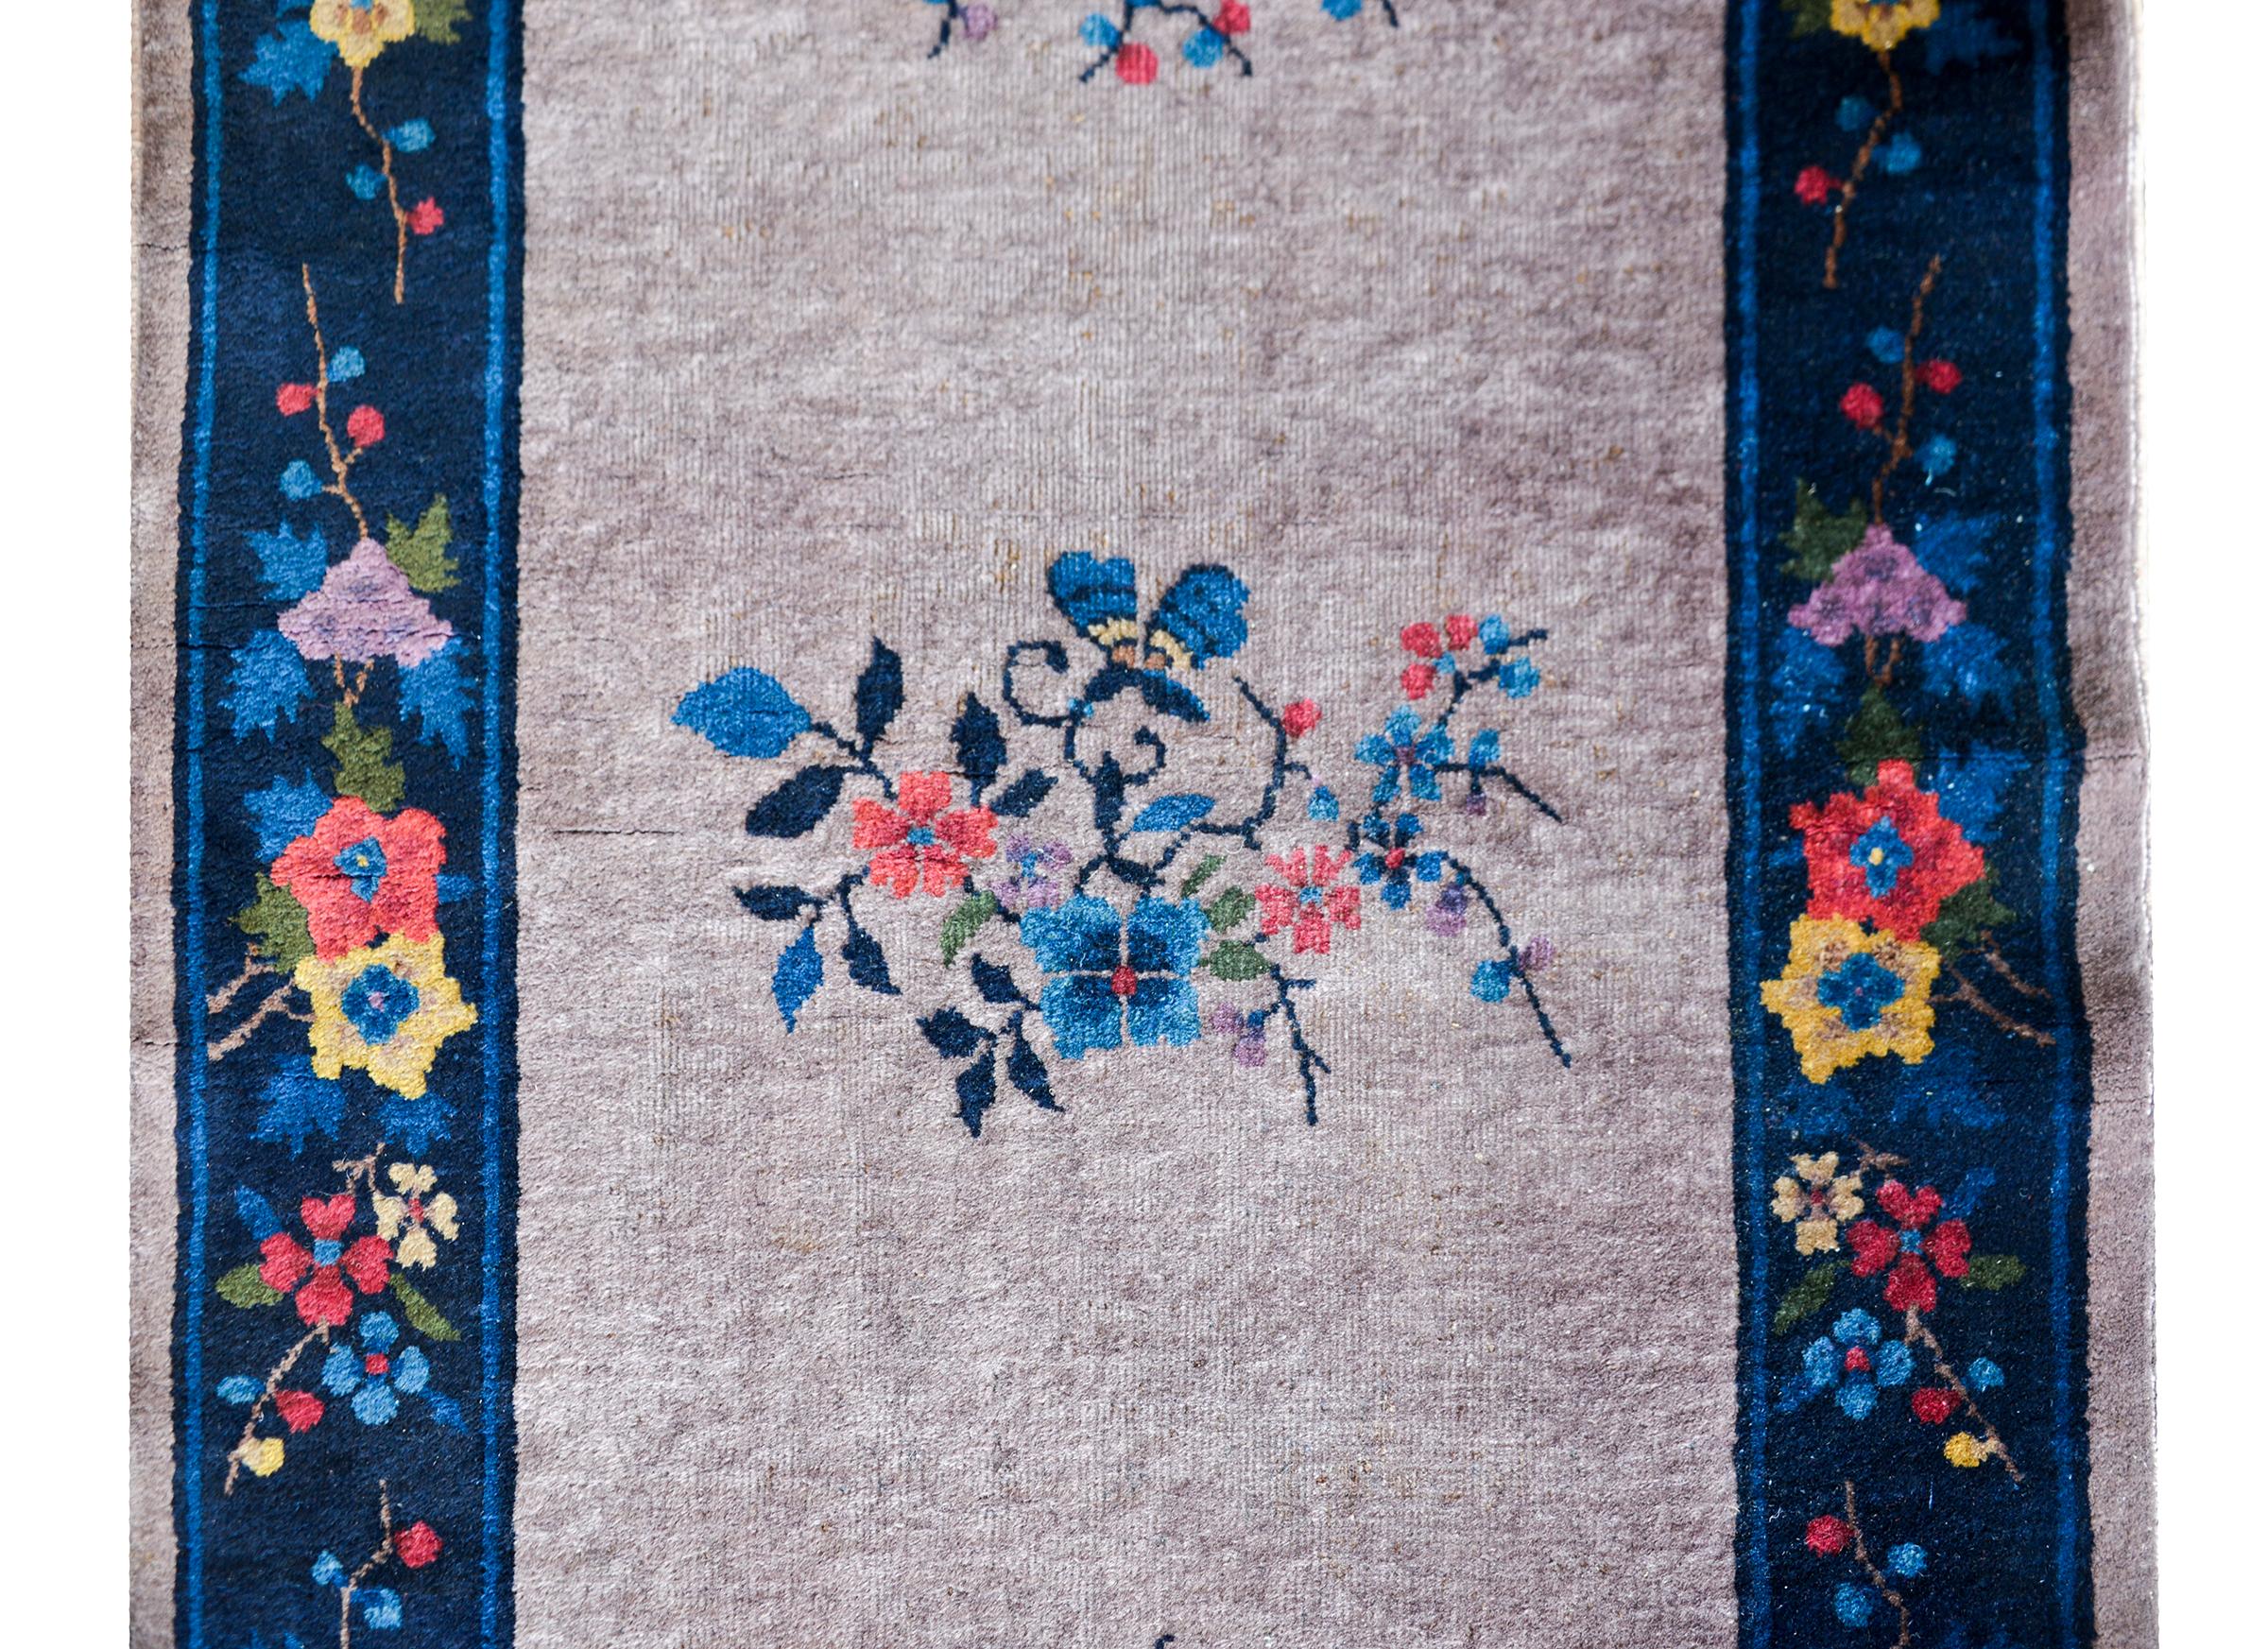 A wonderful Chinese Art Deco runner with a gray field with five multi-colored cherry blossom medallions surrounded by an indigo border with more multi-colored auspicious flowers including lotus, peonies, and more cherry blossoms.